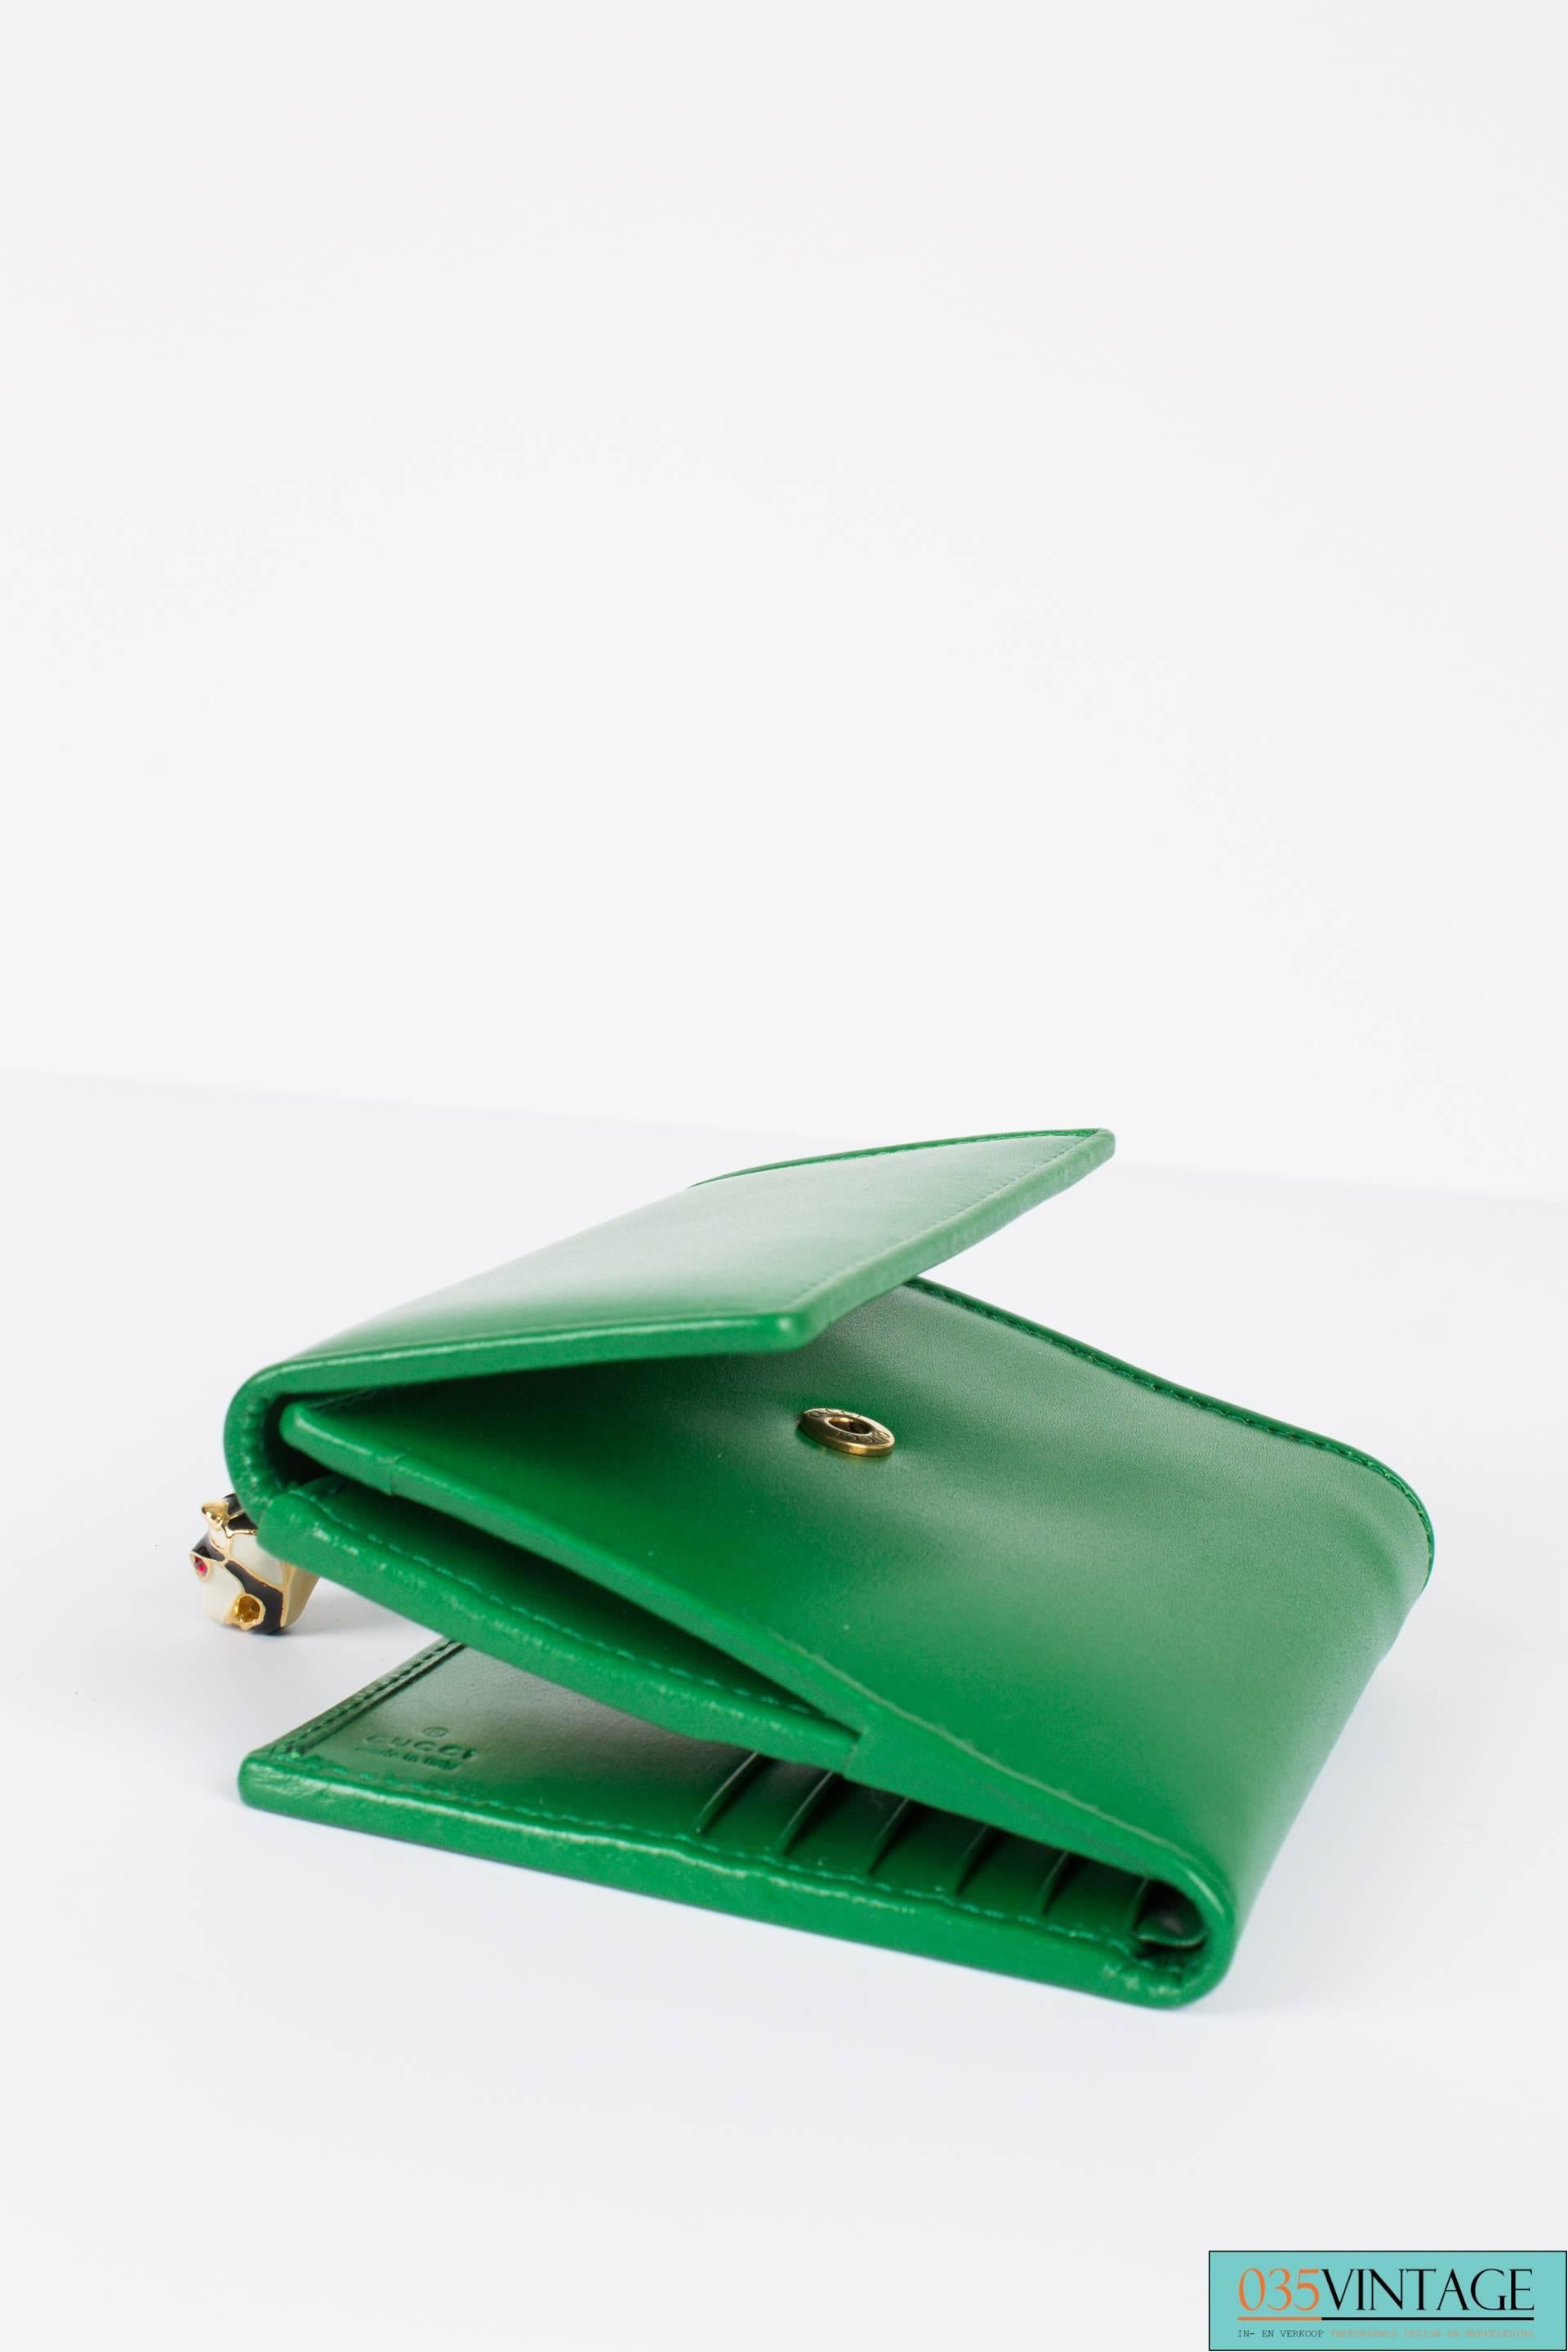 Exciting Gucci billfold wallet with a tiger's head for closure. Roooaaarrrr!

This wallet is from the Tigrette collection by Gucci and it's made of sturdy green leather. At the back a little pocket to store your coins, it closes with a push